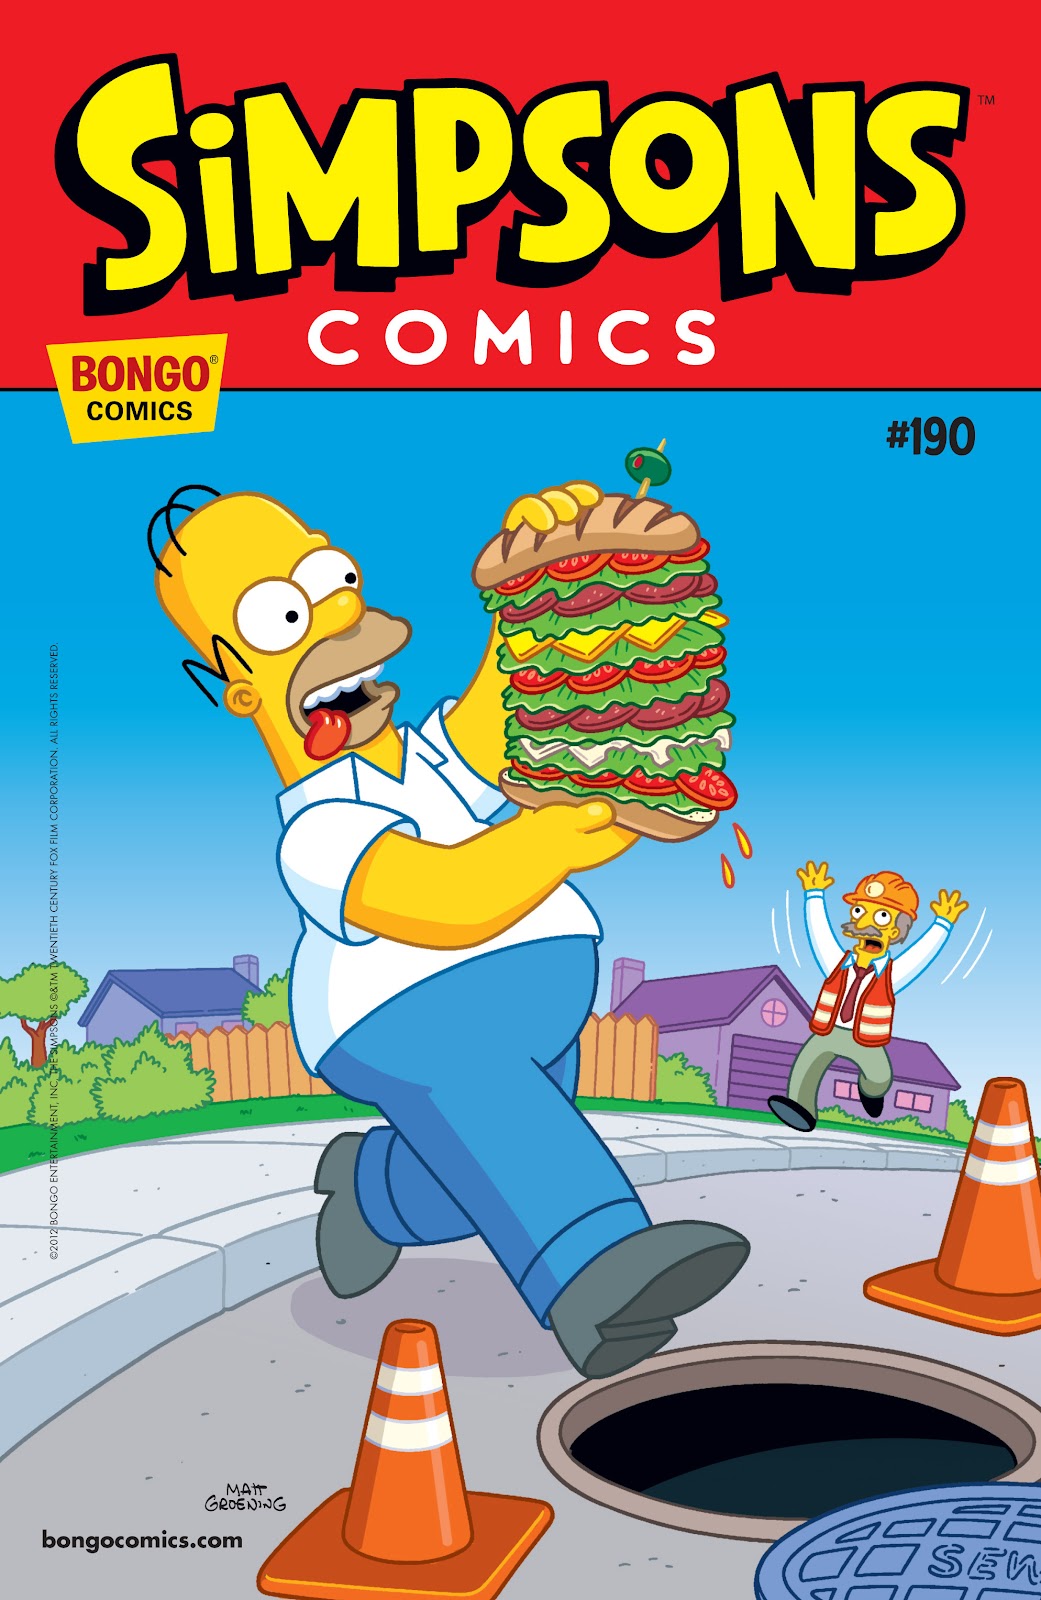 Simpsons Comics issue 190 - Page 1